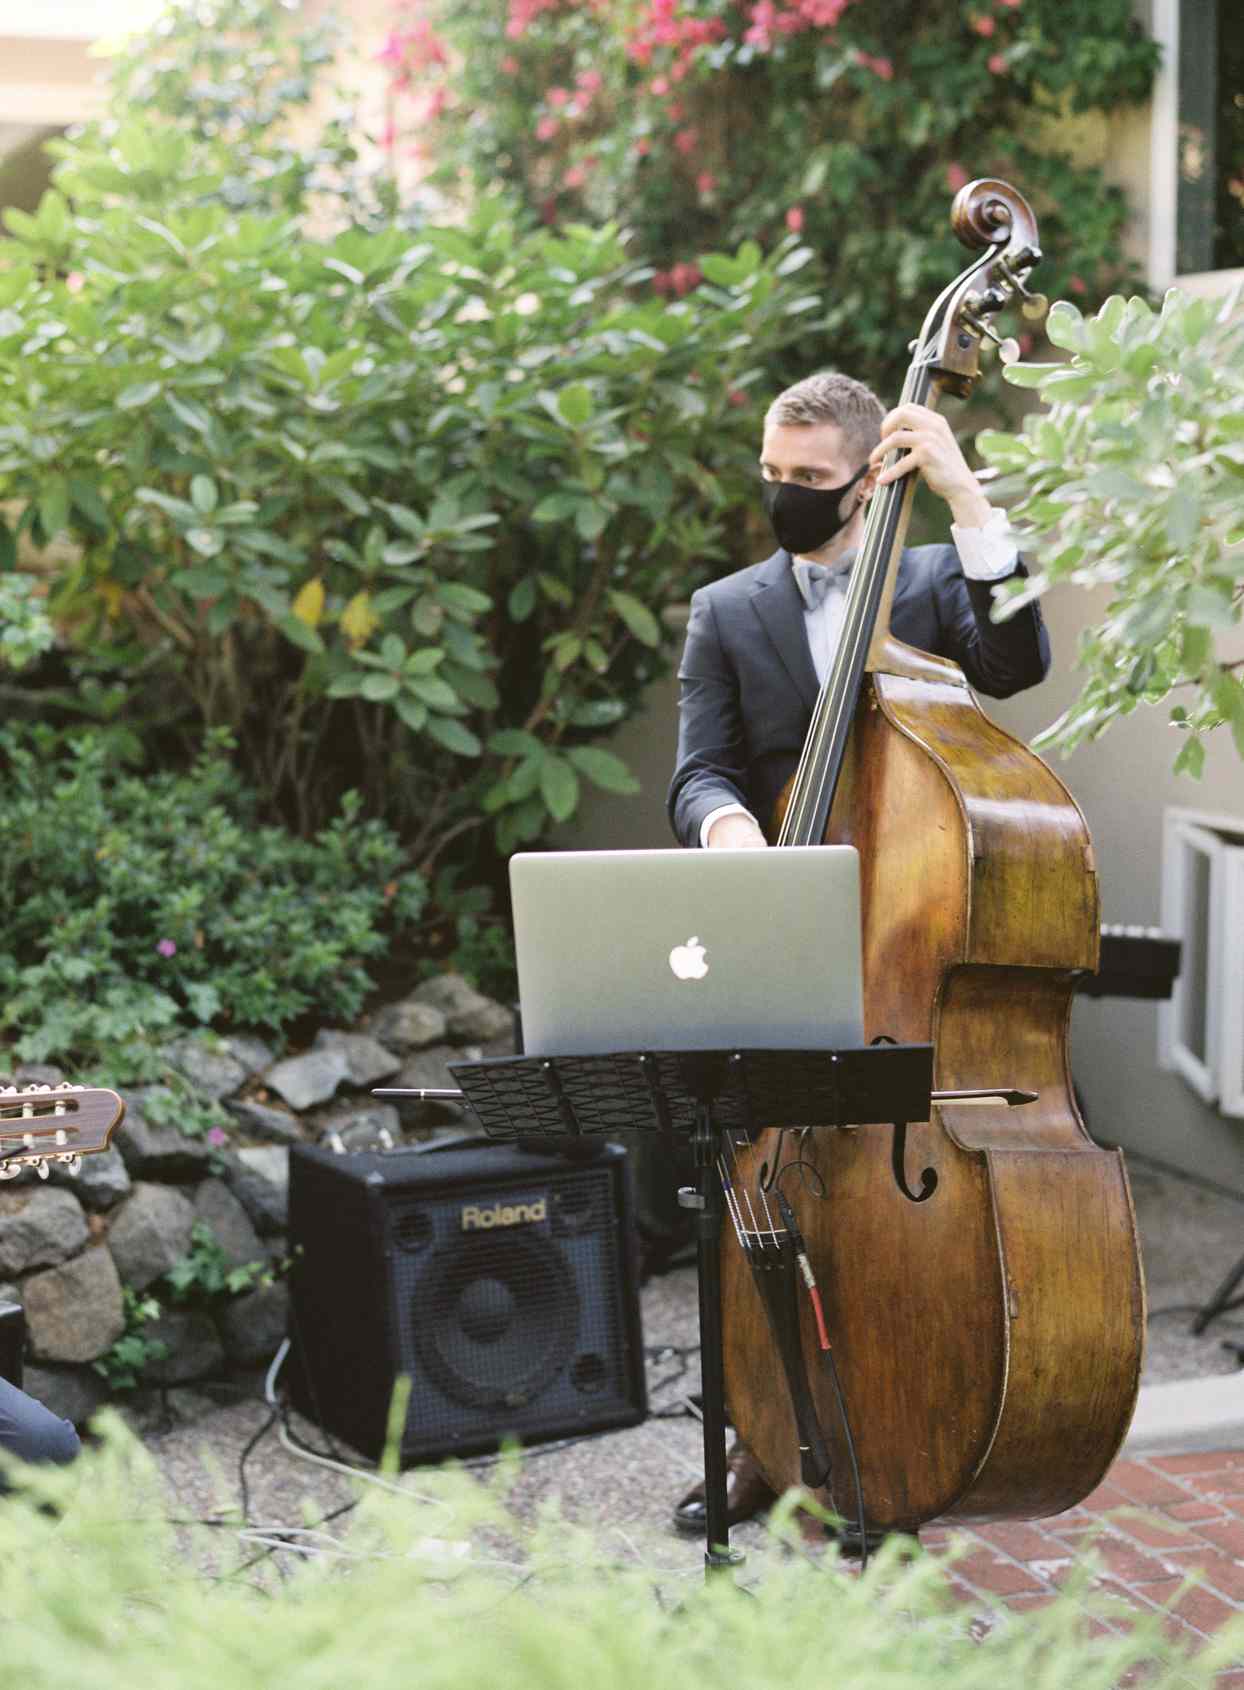 upright bass player at small wedding ceremony